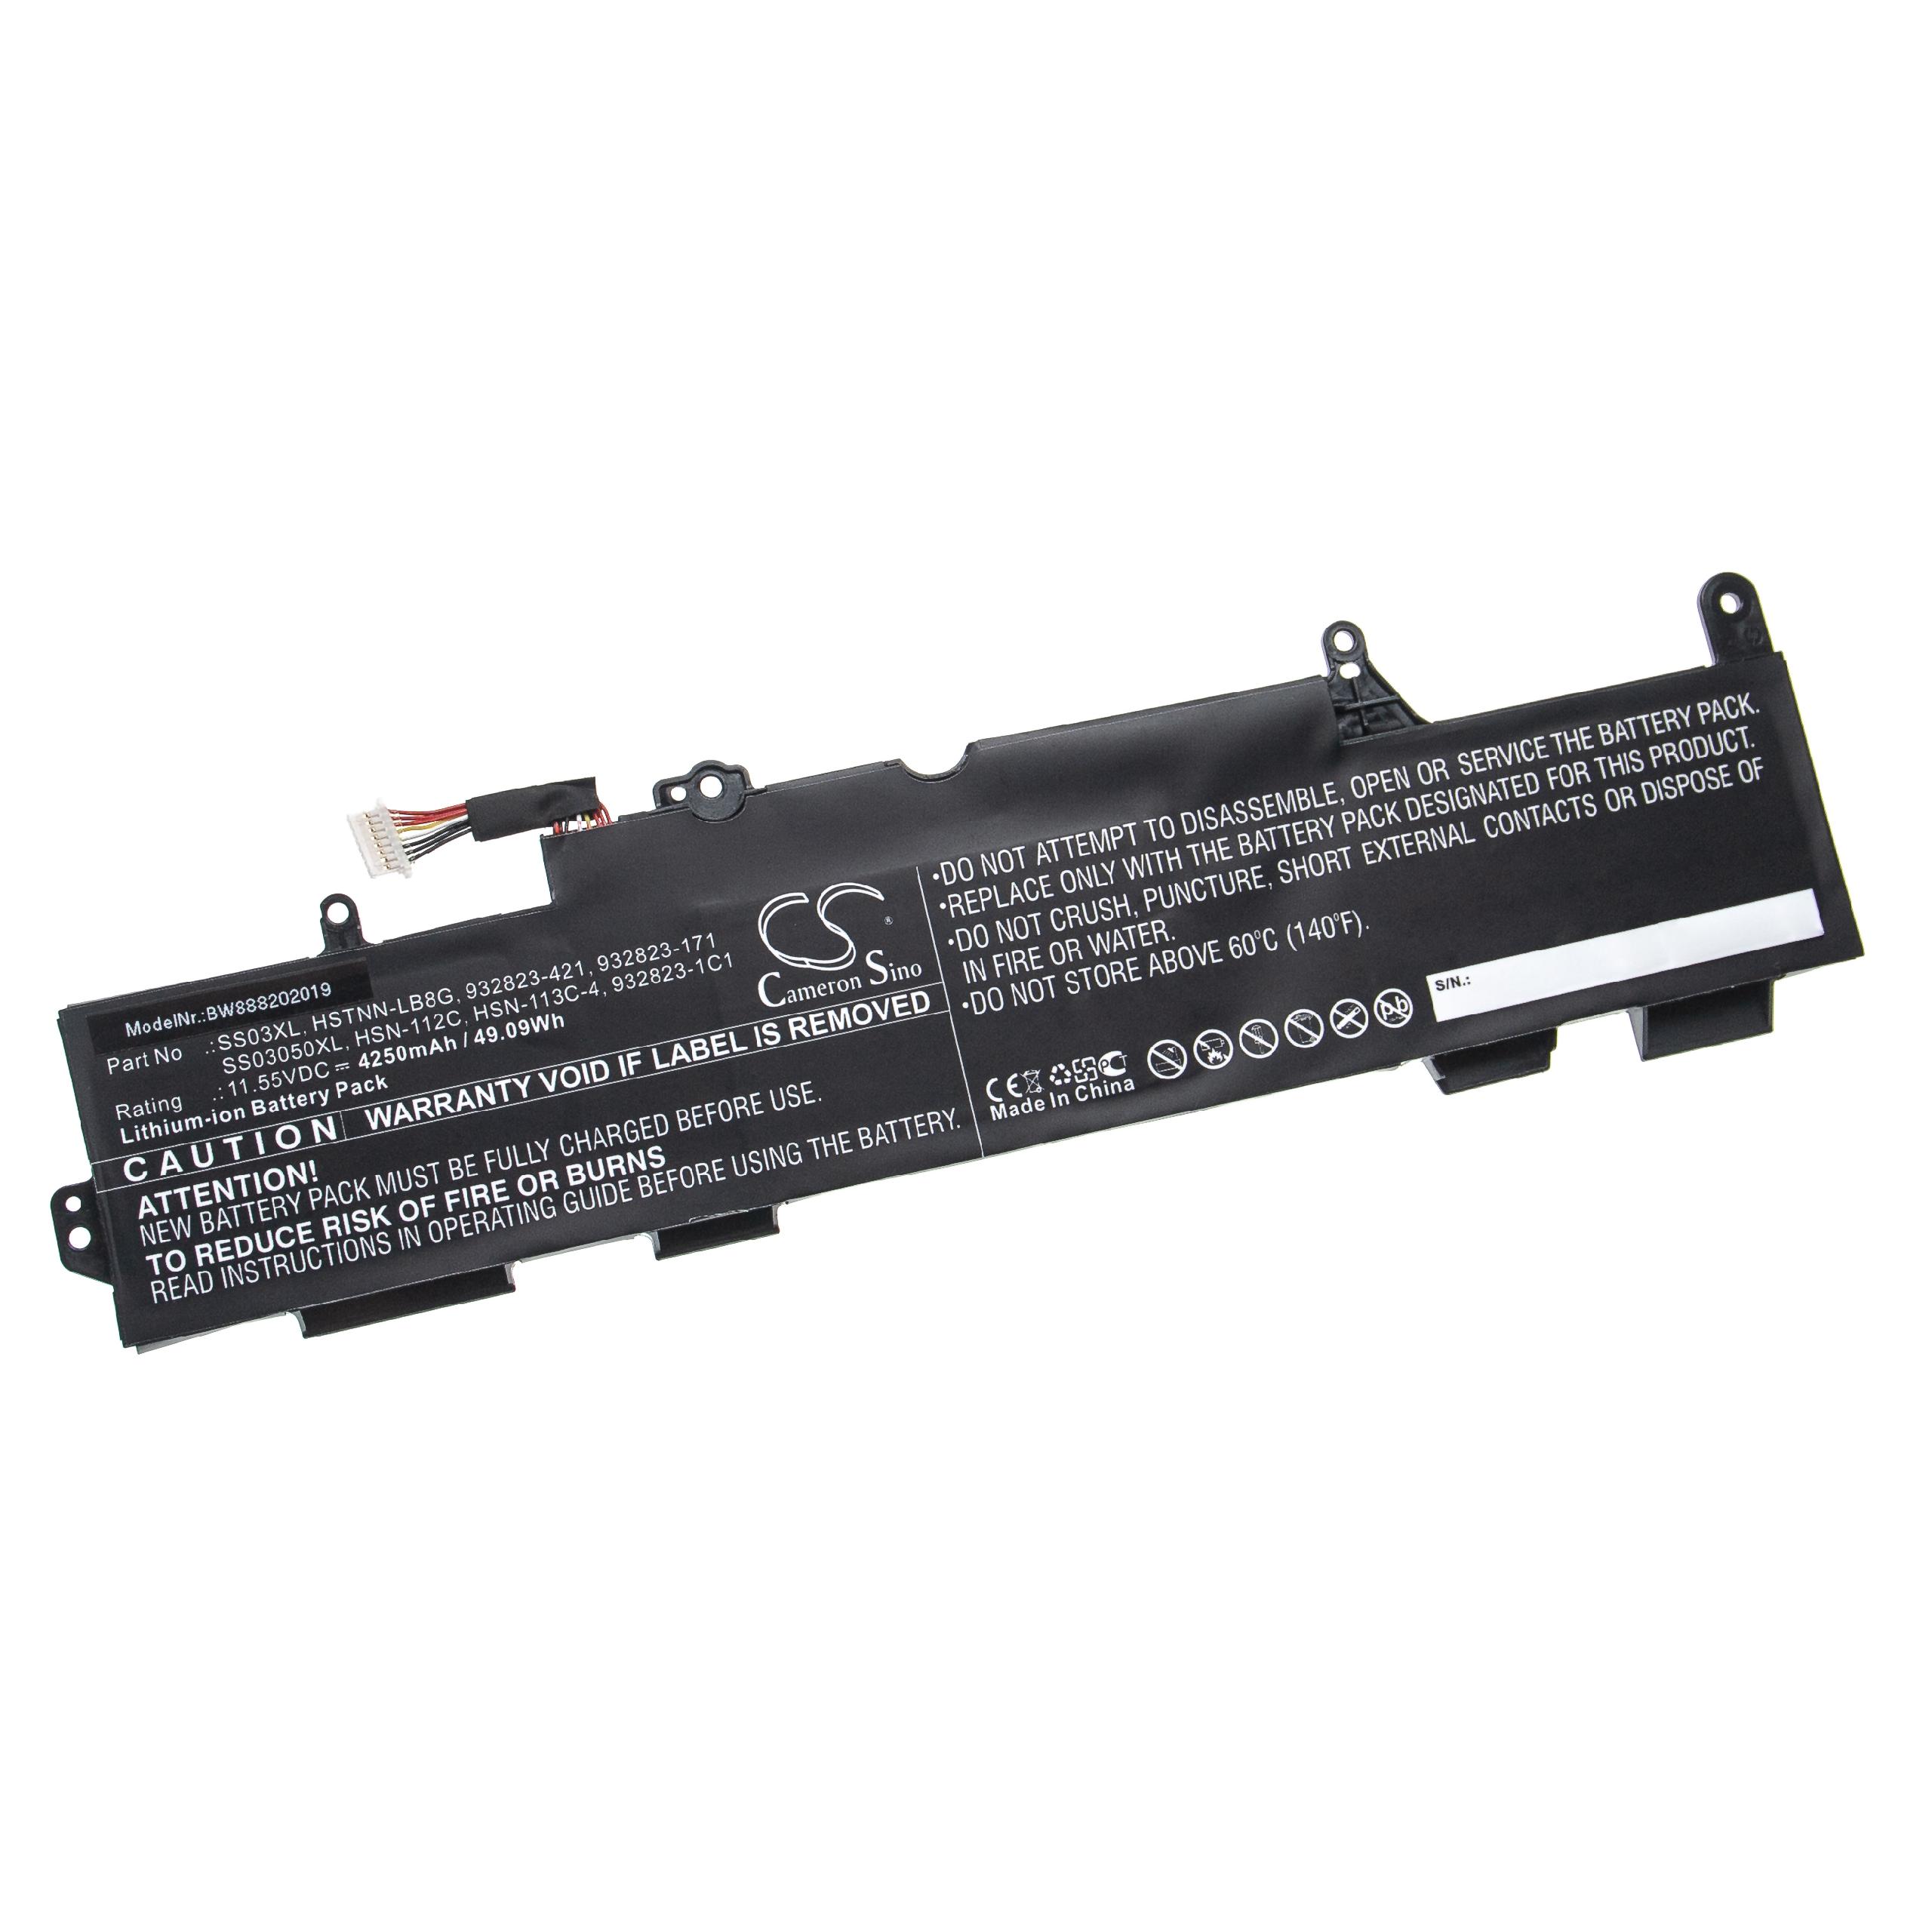 Notebook Battery Replacement for HP 932823-271, 932823-2B1, 932823-1C1, 932823-171 - 4250mAh 11.55V Li-Ion